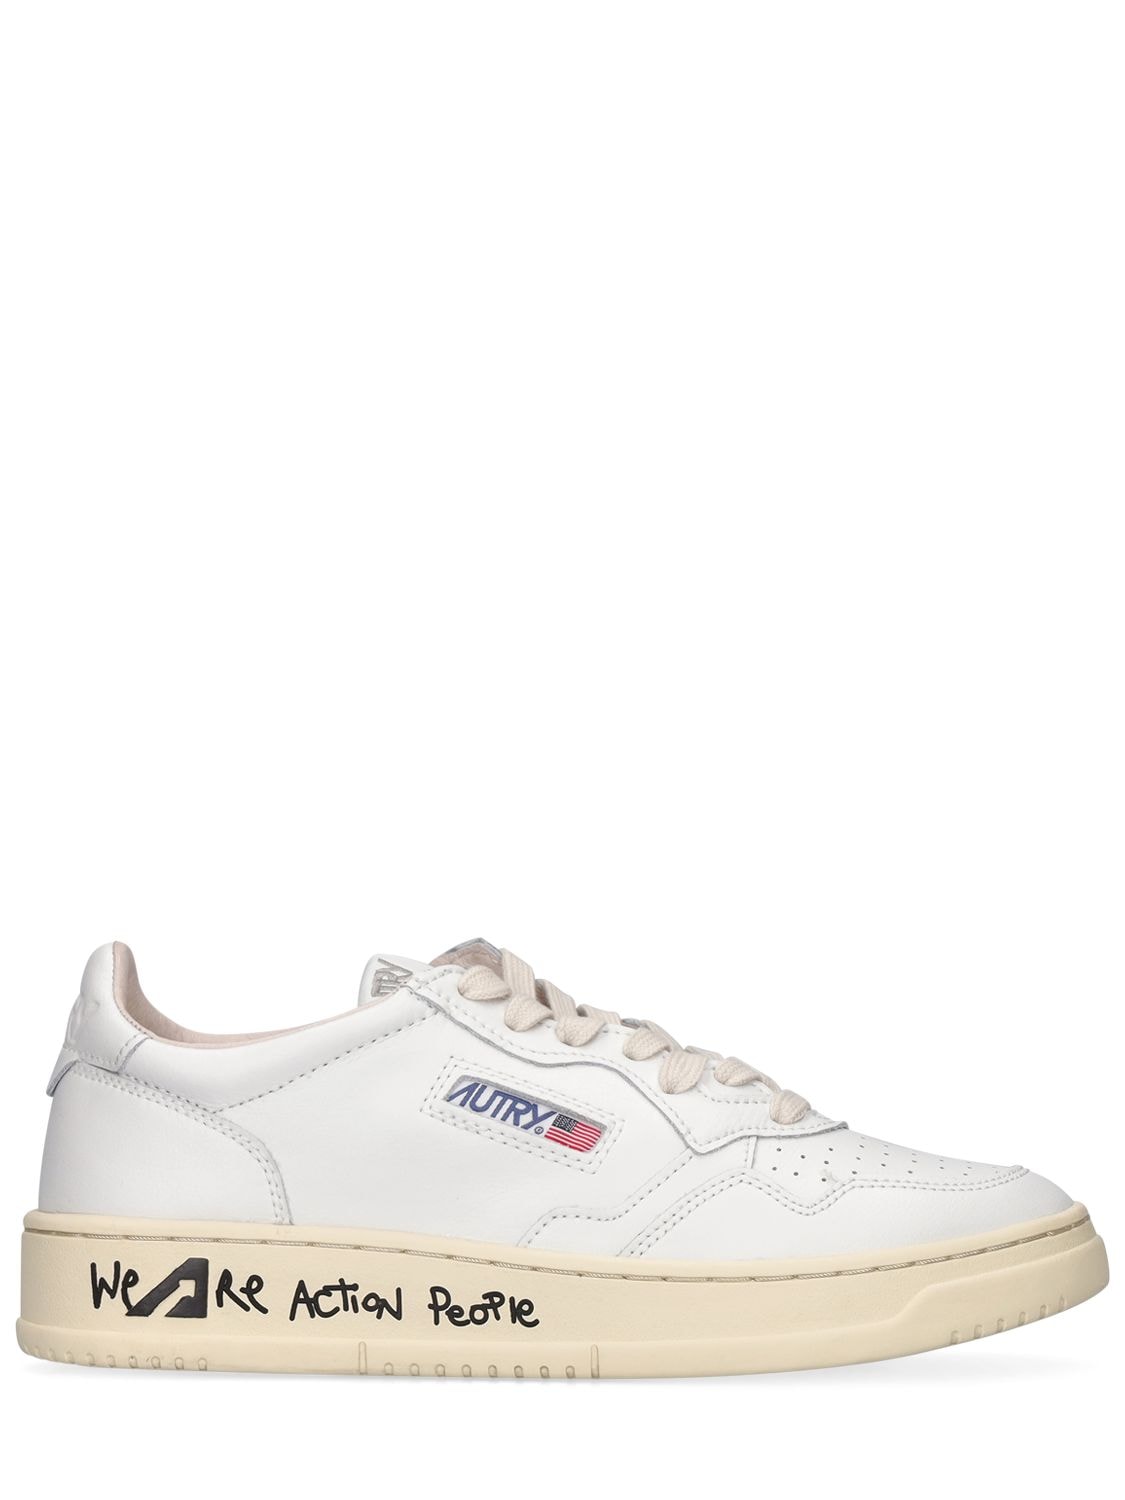 Medalist We Are Action People Sneakers – WOMEN > SHOES > SNEAKERS